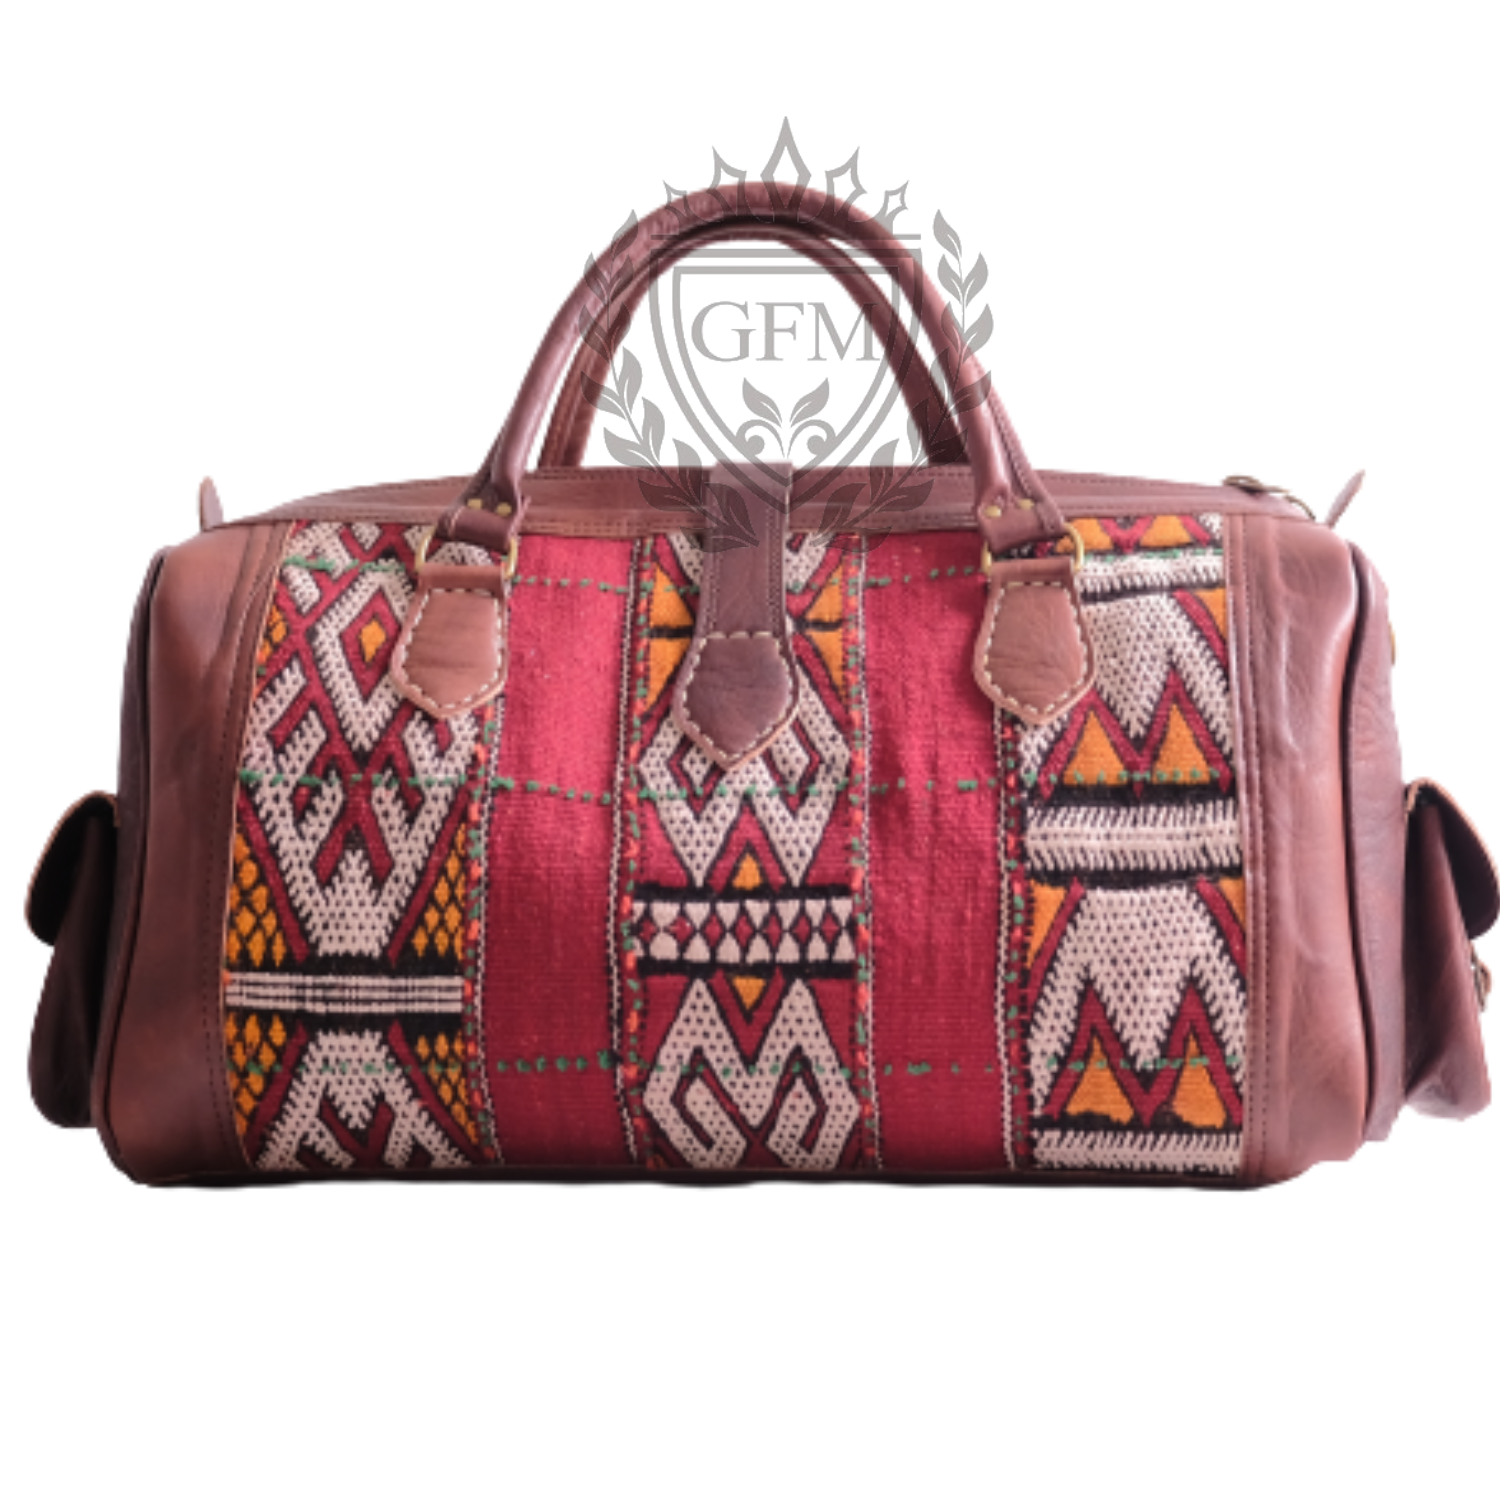 Why choose a Moroccan Kilim travel bag over a traditional travel bag?